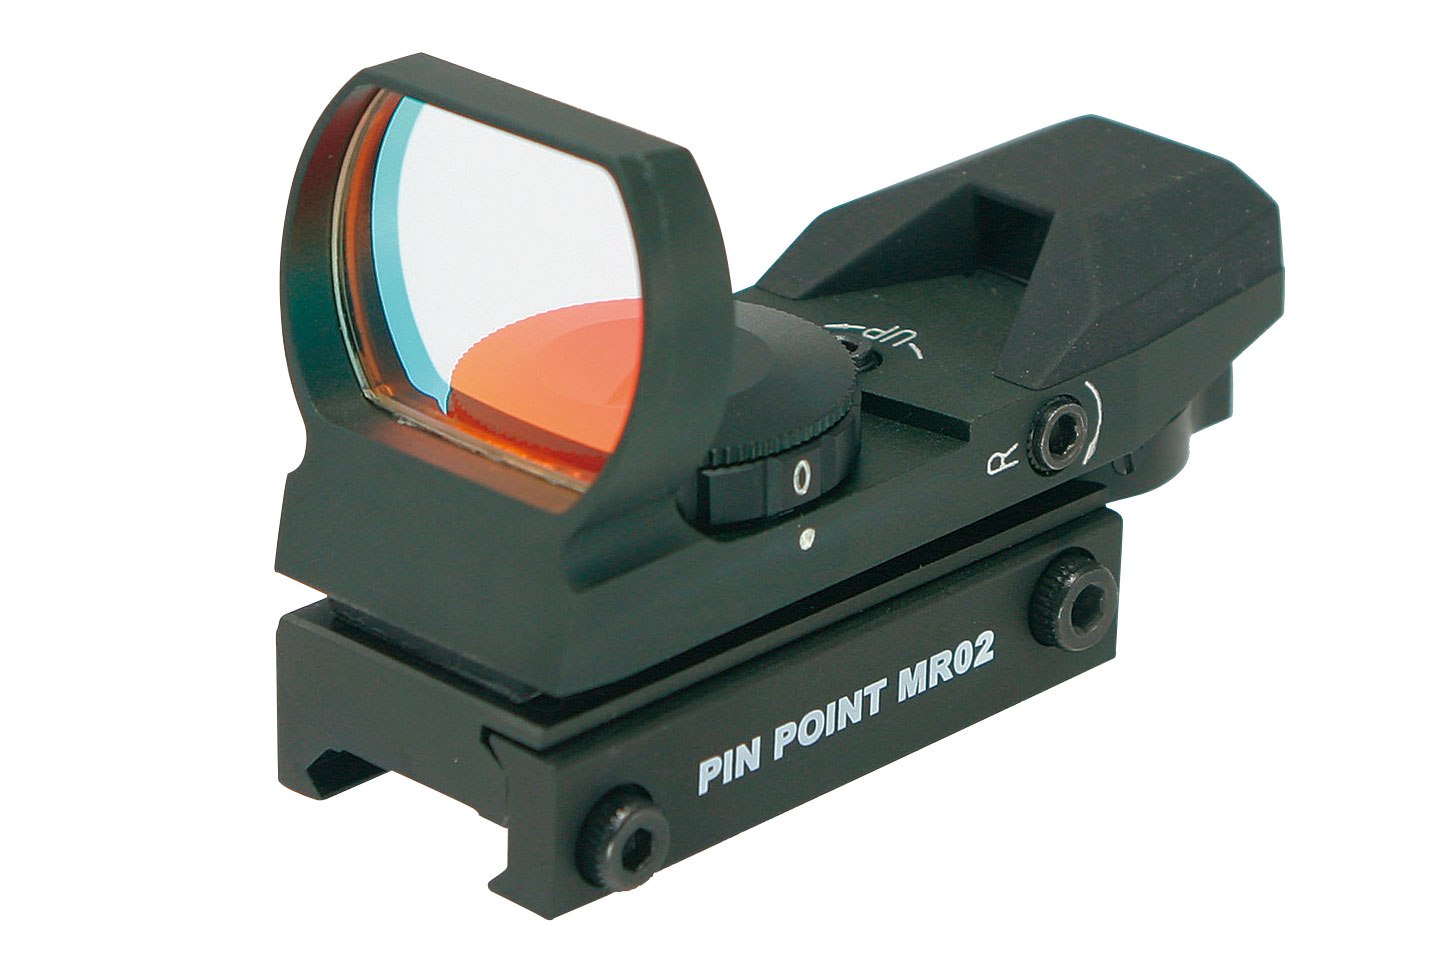 PIN POINT MR02